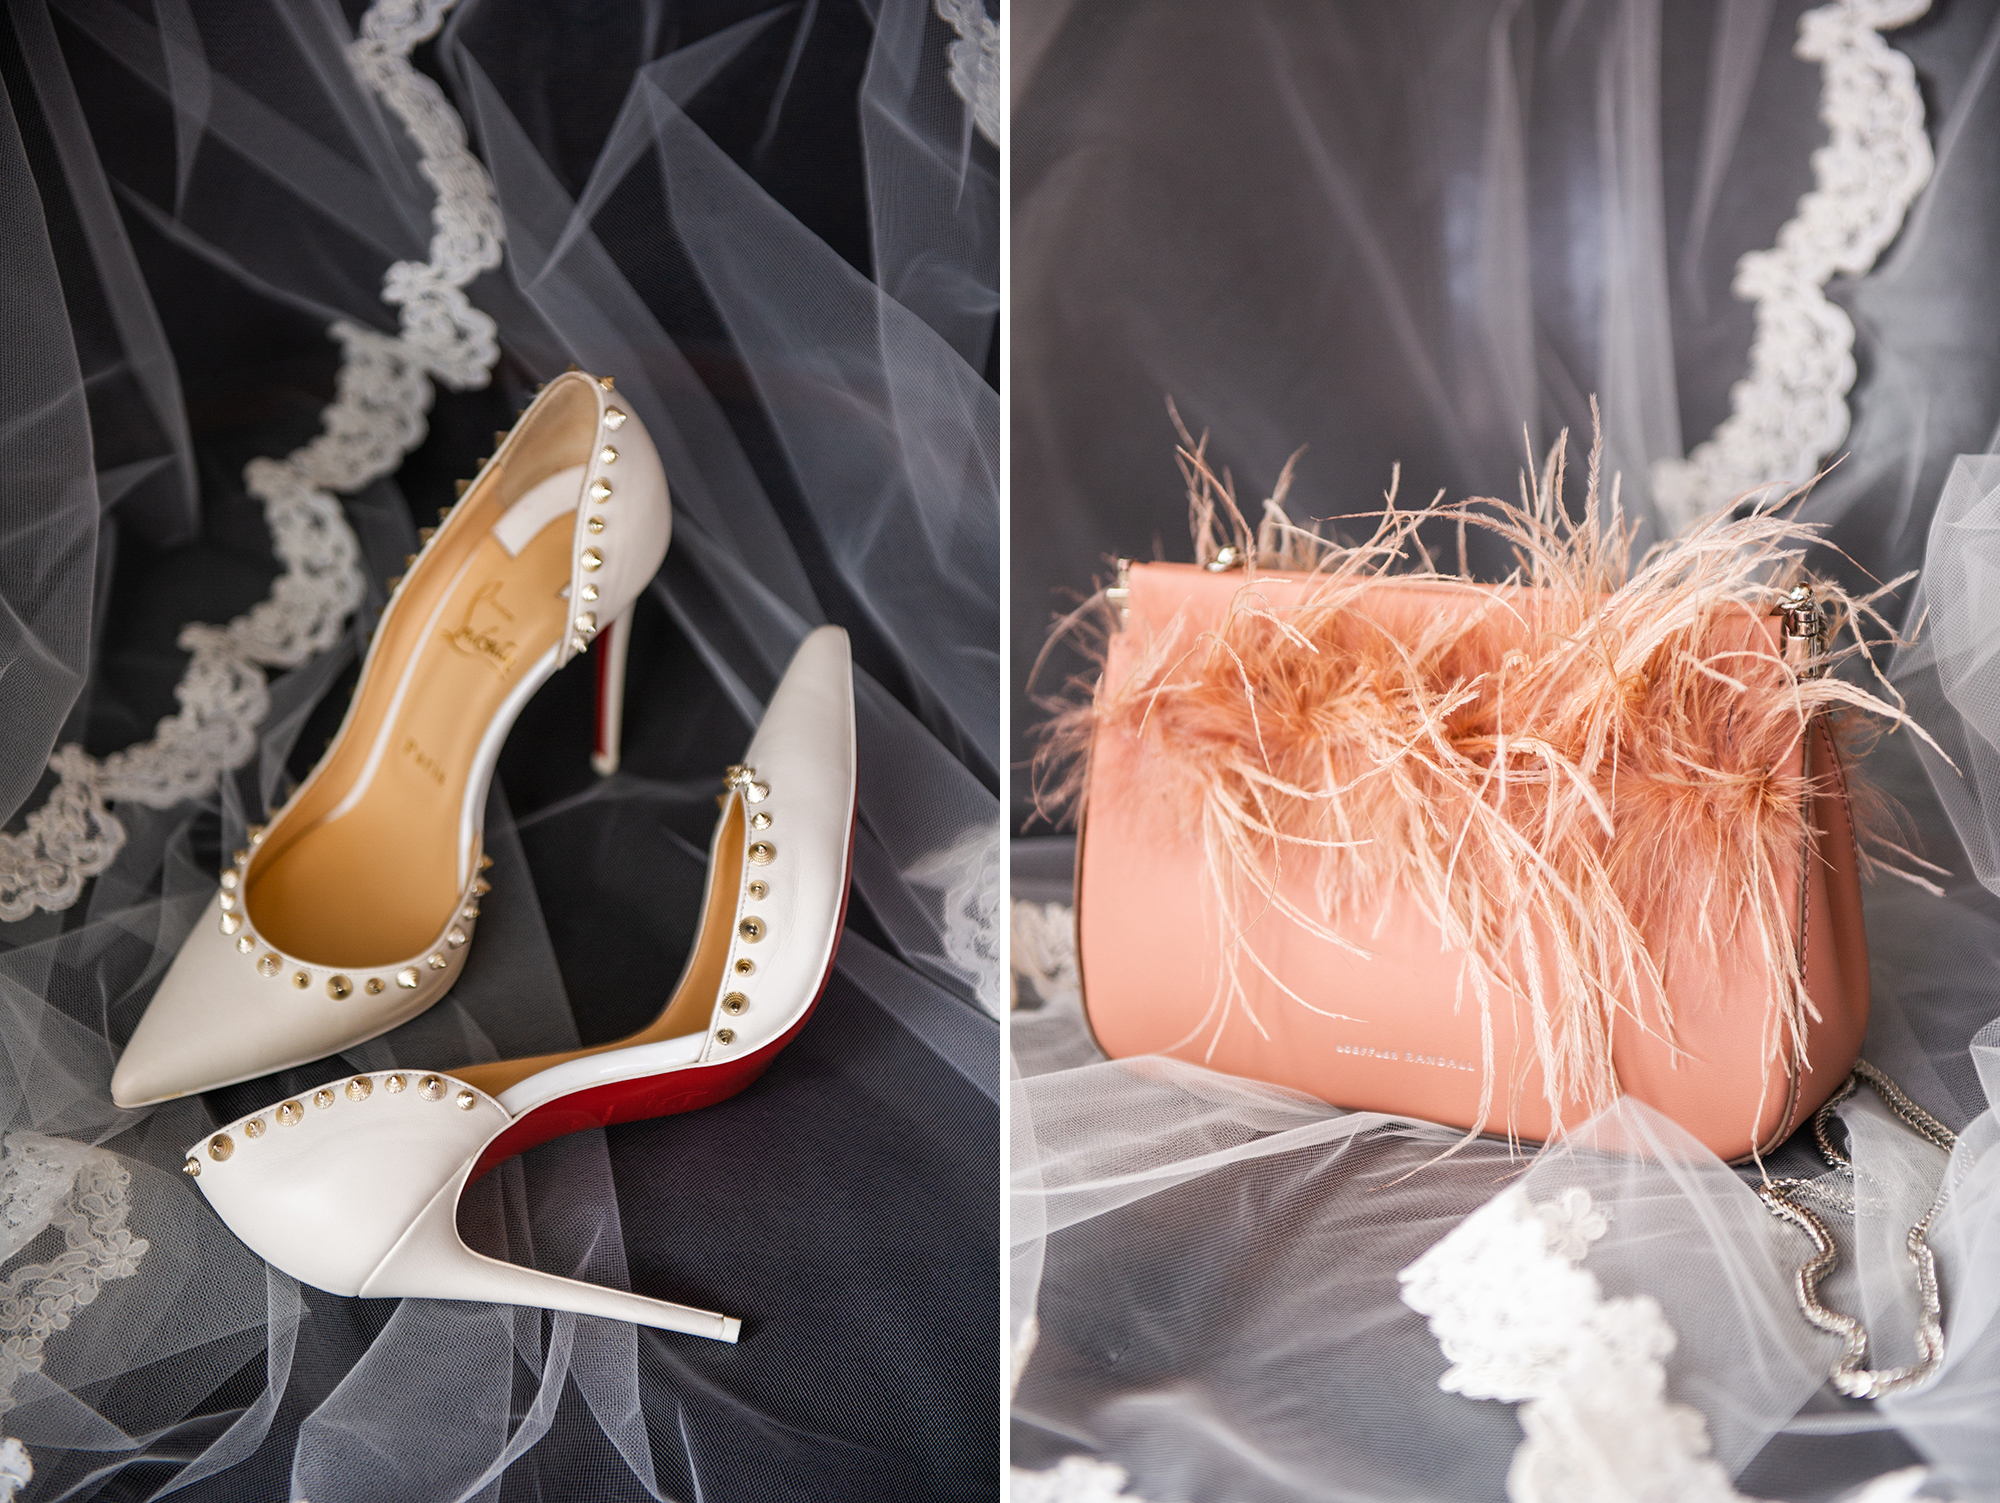 Bride's shoes and clutch